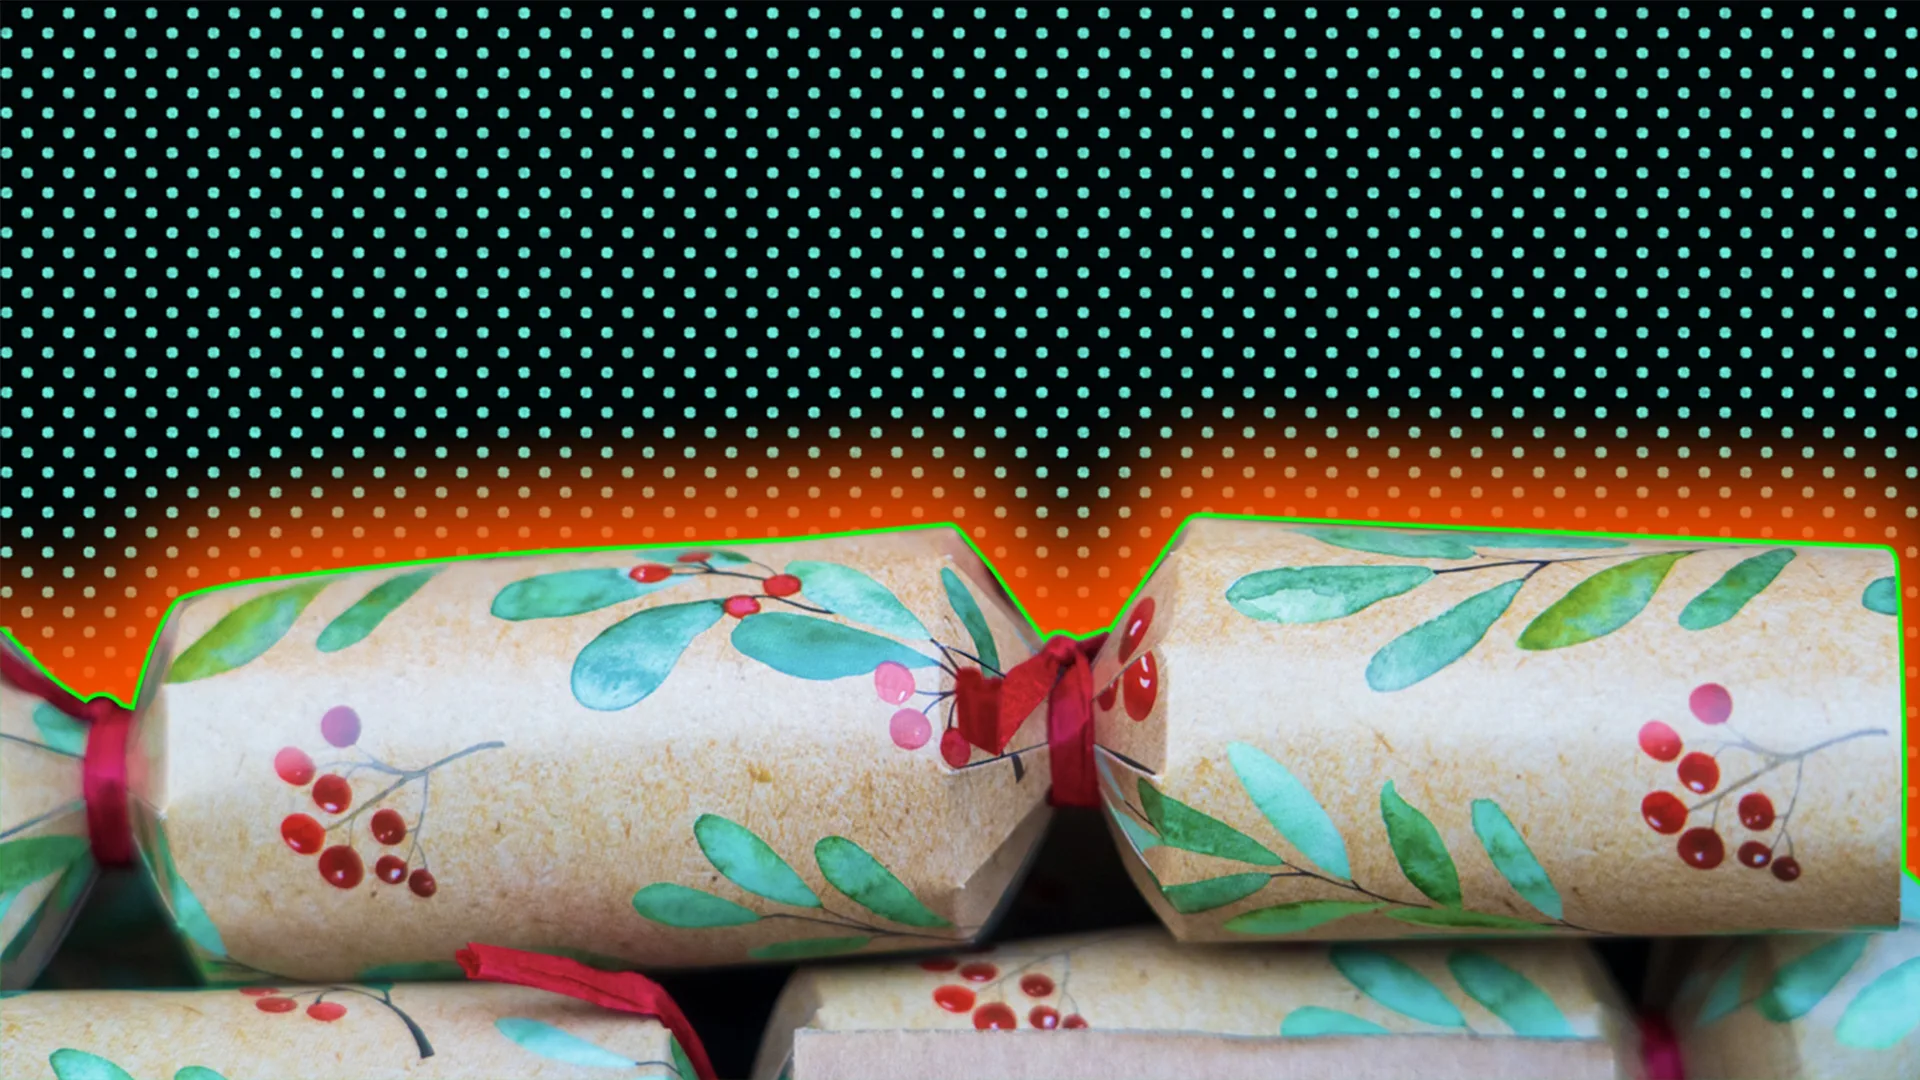 Christmas crackers with a polkadot background and a glow around the image